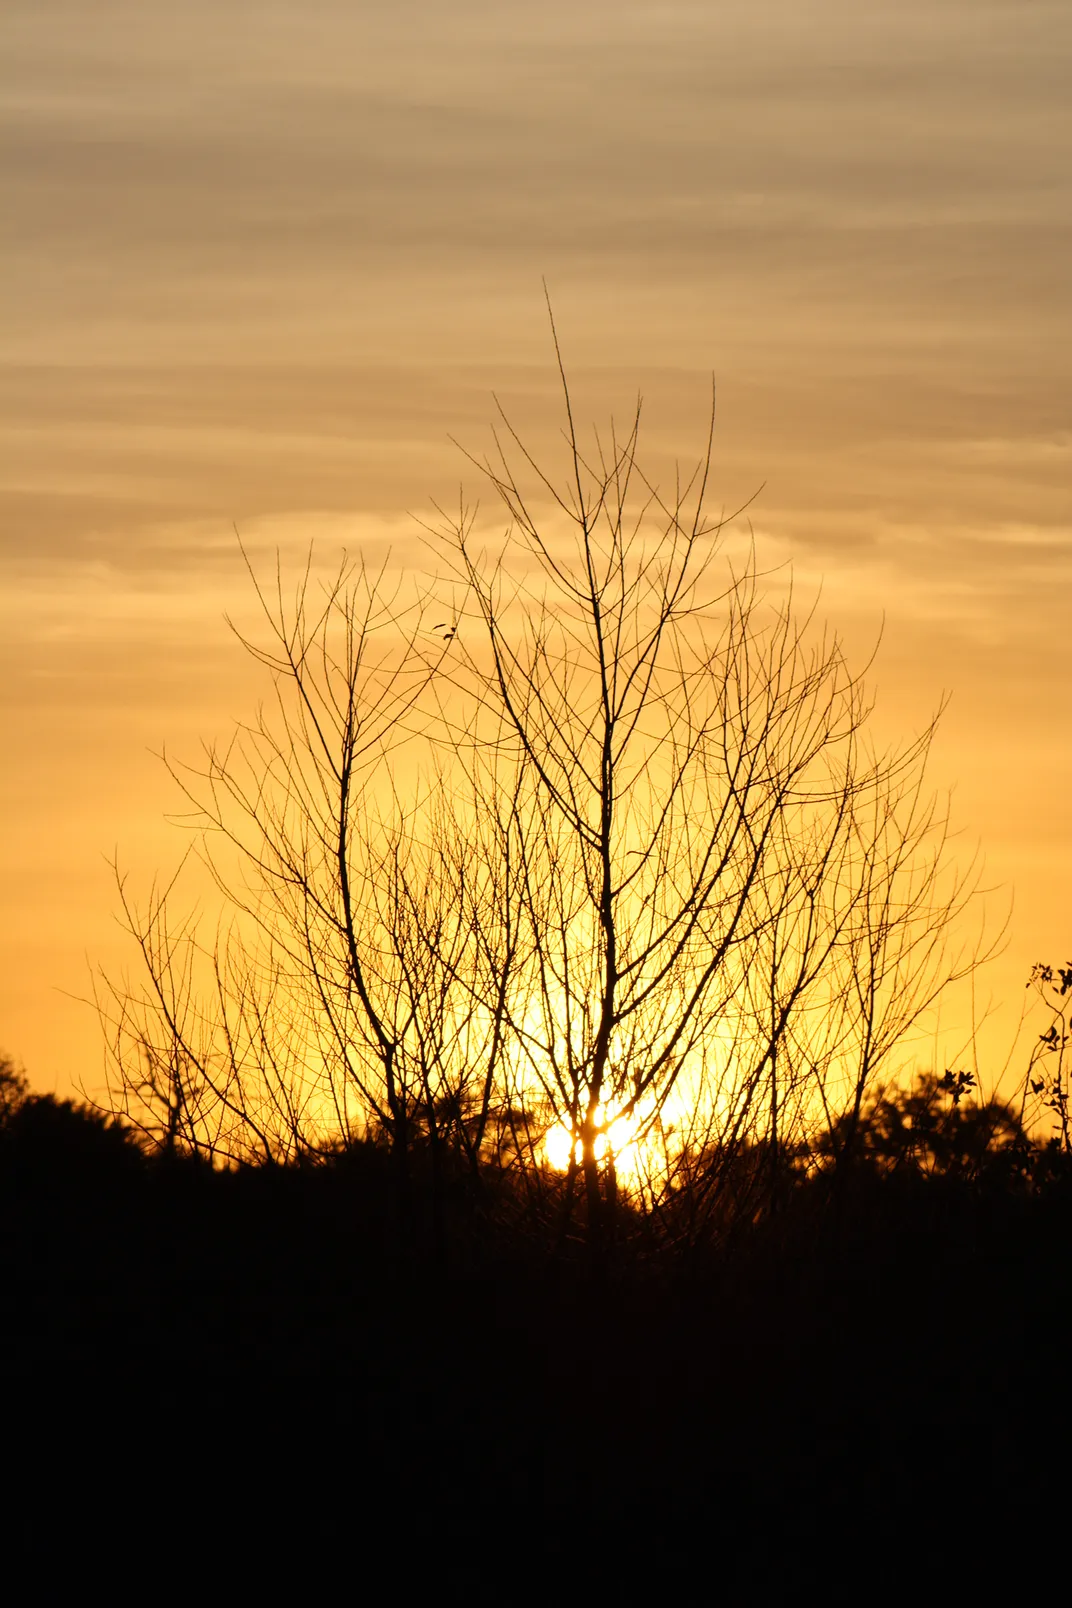 An eastern sunrise through the branches | Smithsonian Photo Contest